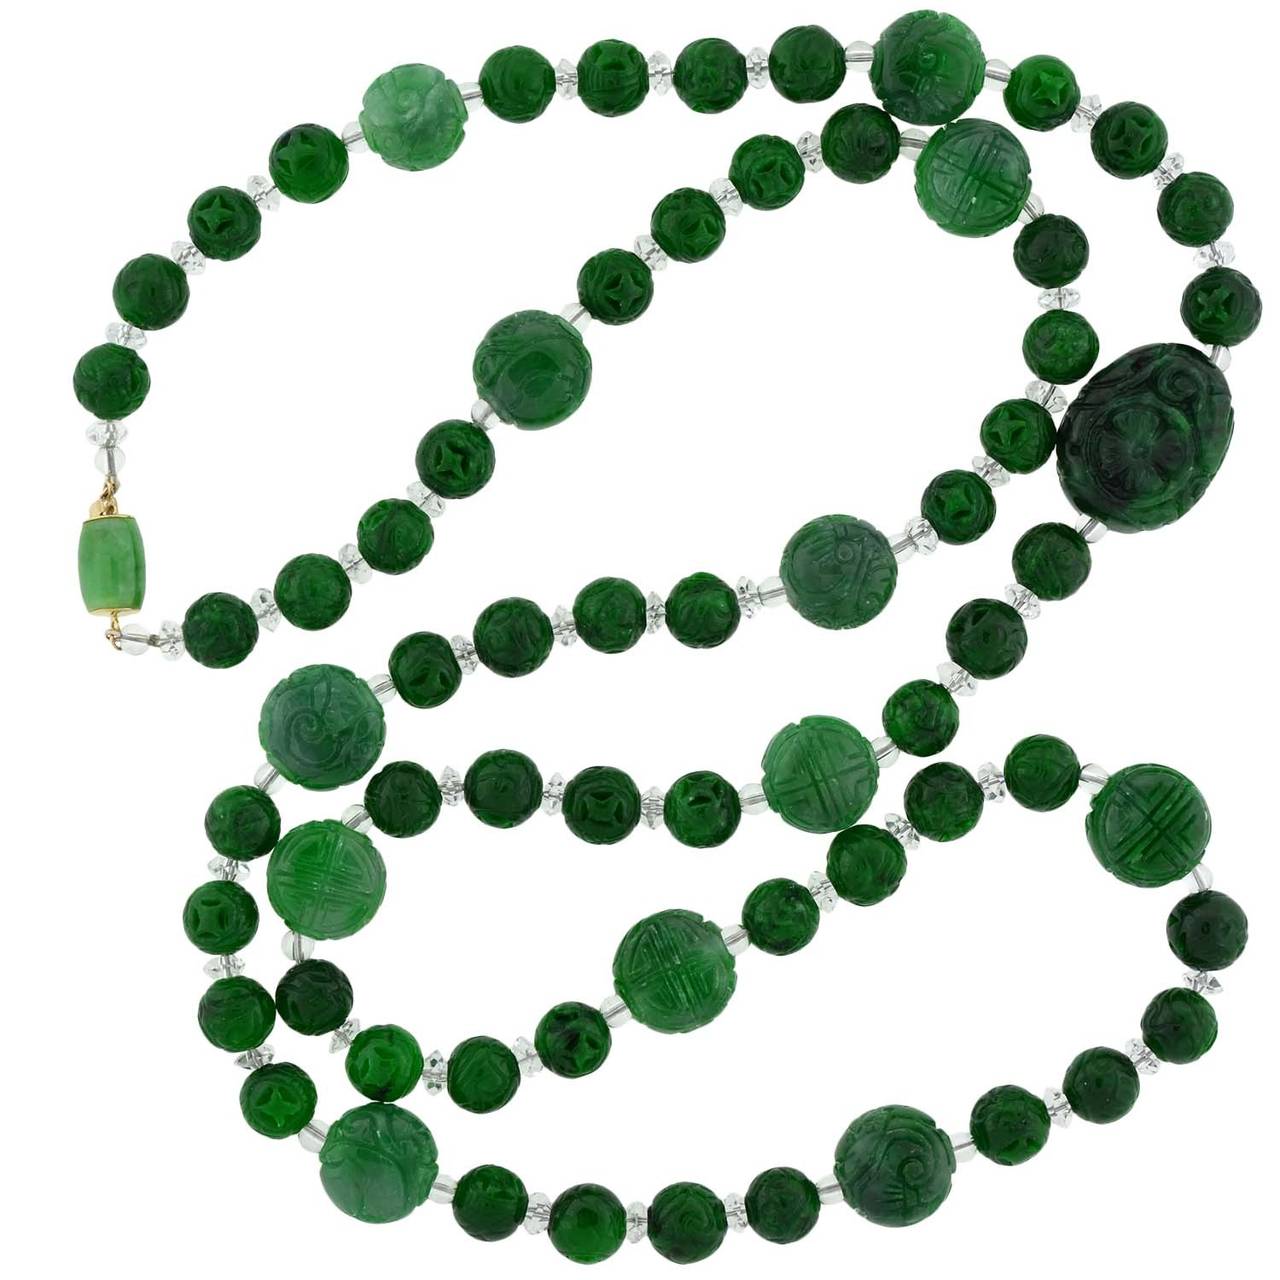 An incredible jade necklace from the Art Deco (ca1920) era! This beautiful piece is comprised of a single strand of hand carved jade beads which alternate with rock quartz crystal spacers. The necklace has a striking pattern of 4 round beads which